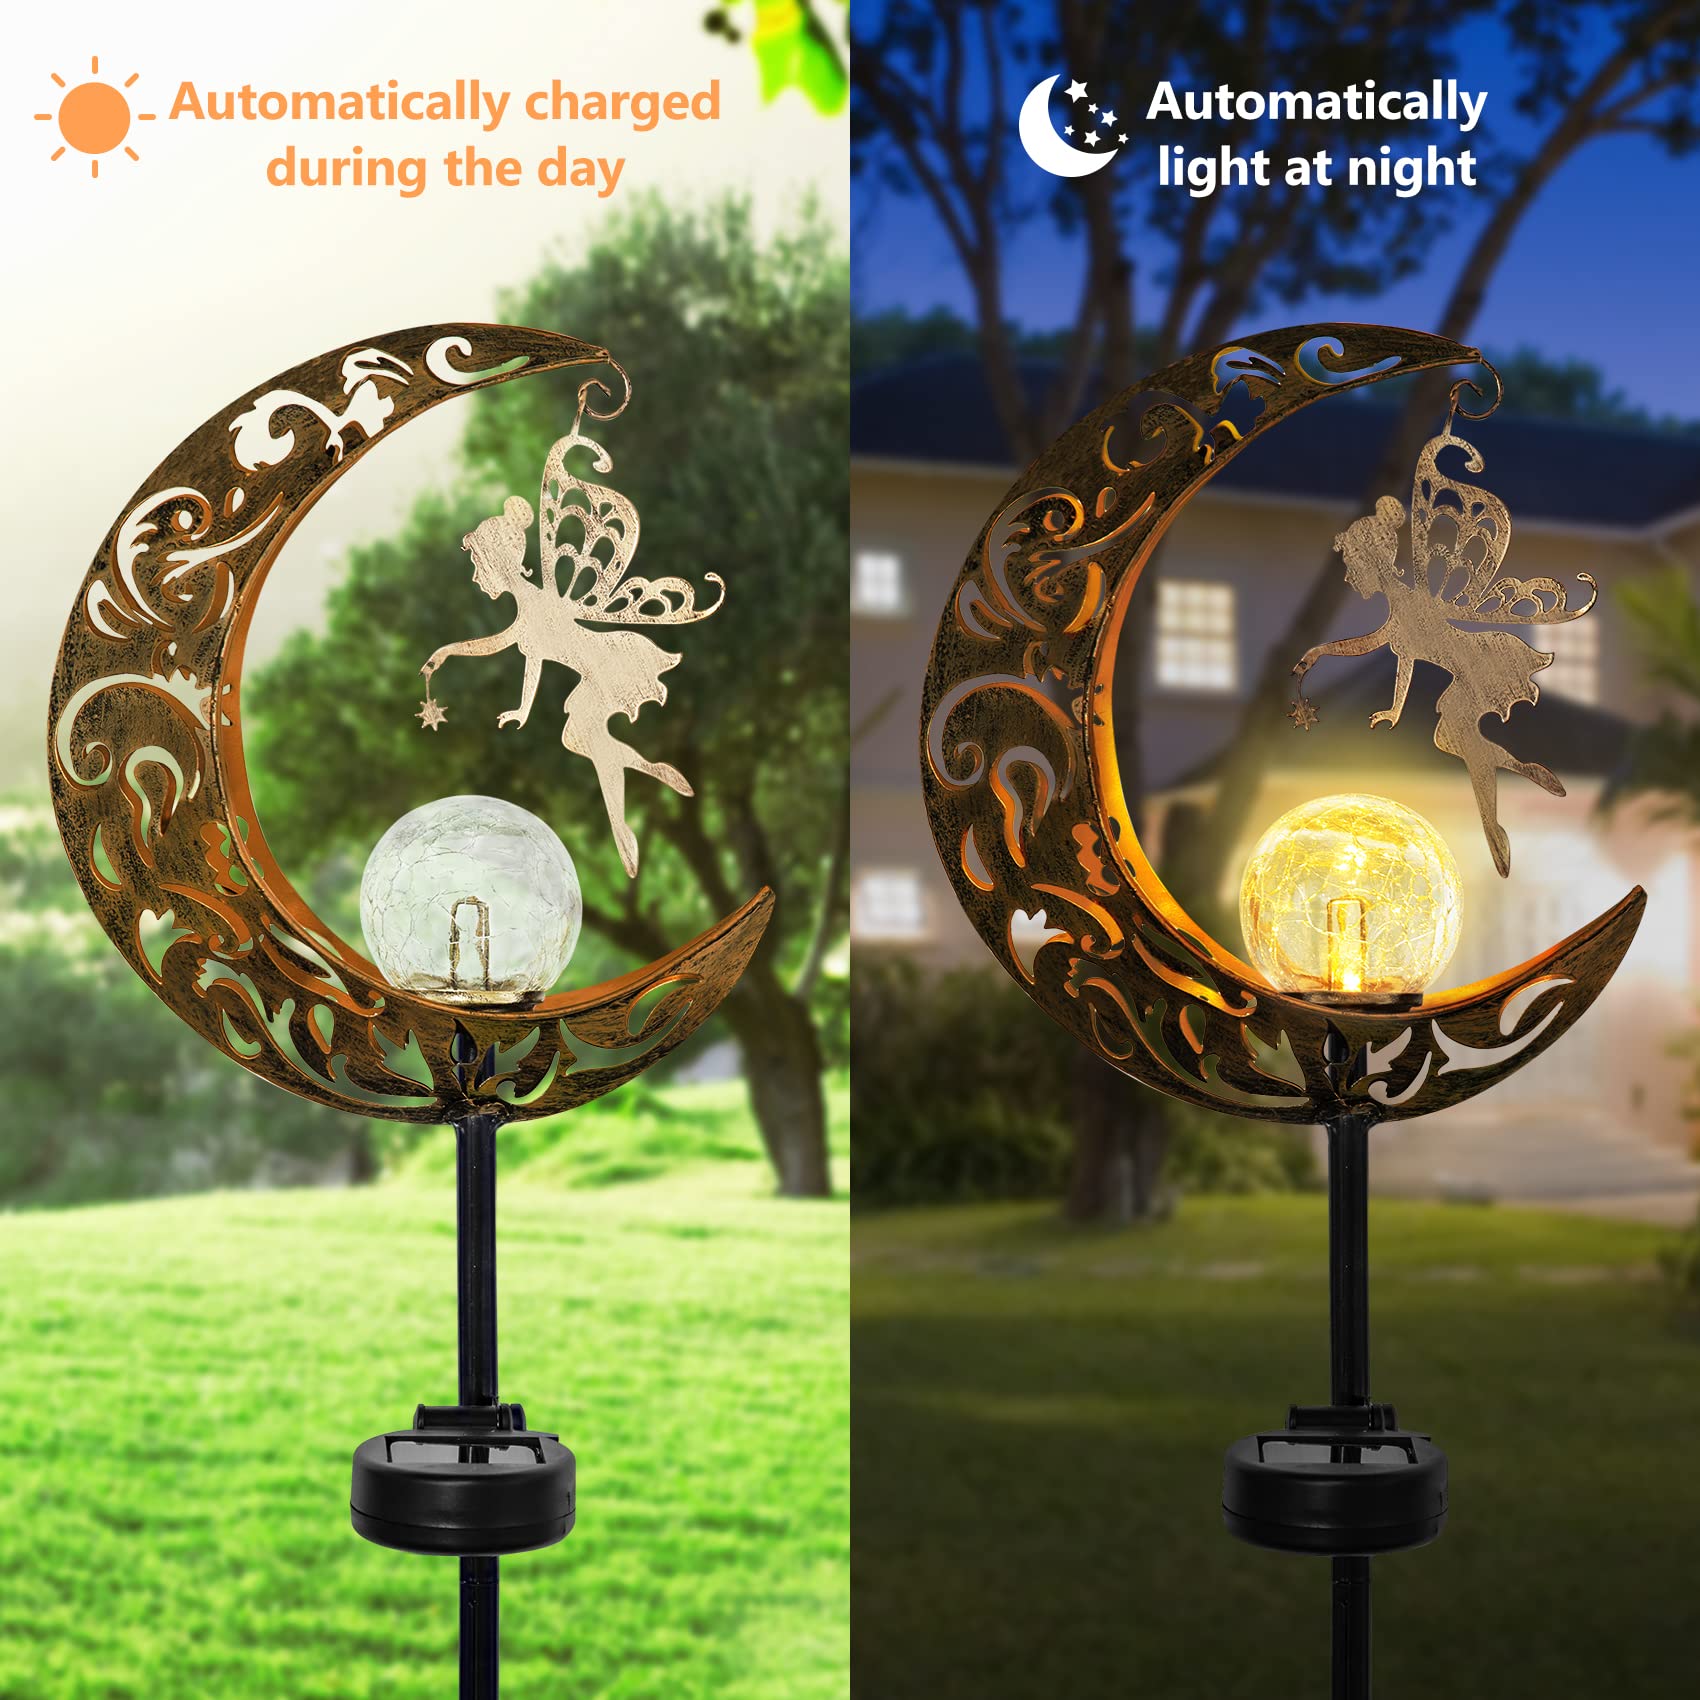 Ouddy Decor Fairy Garden Decor with Solar Watering Can, with Hanging Lanterns Waterfall Lights Silhouette Waterproof - UK GEMS